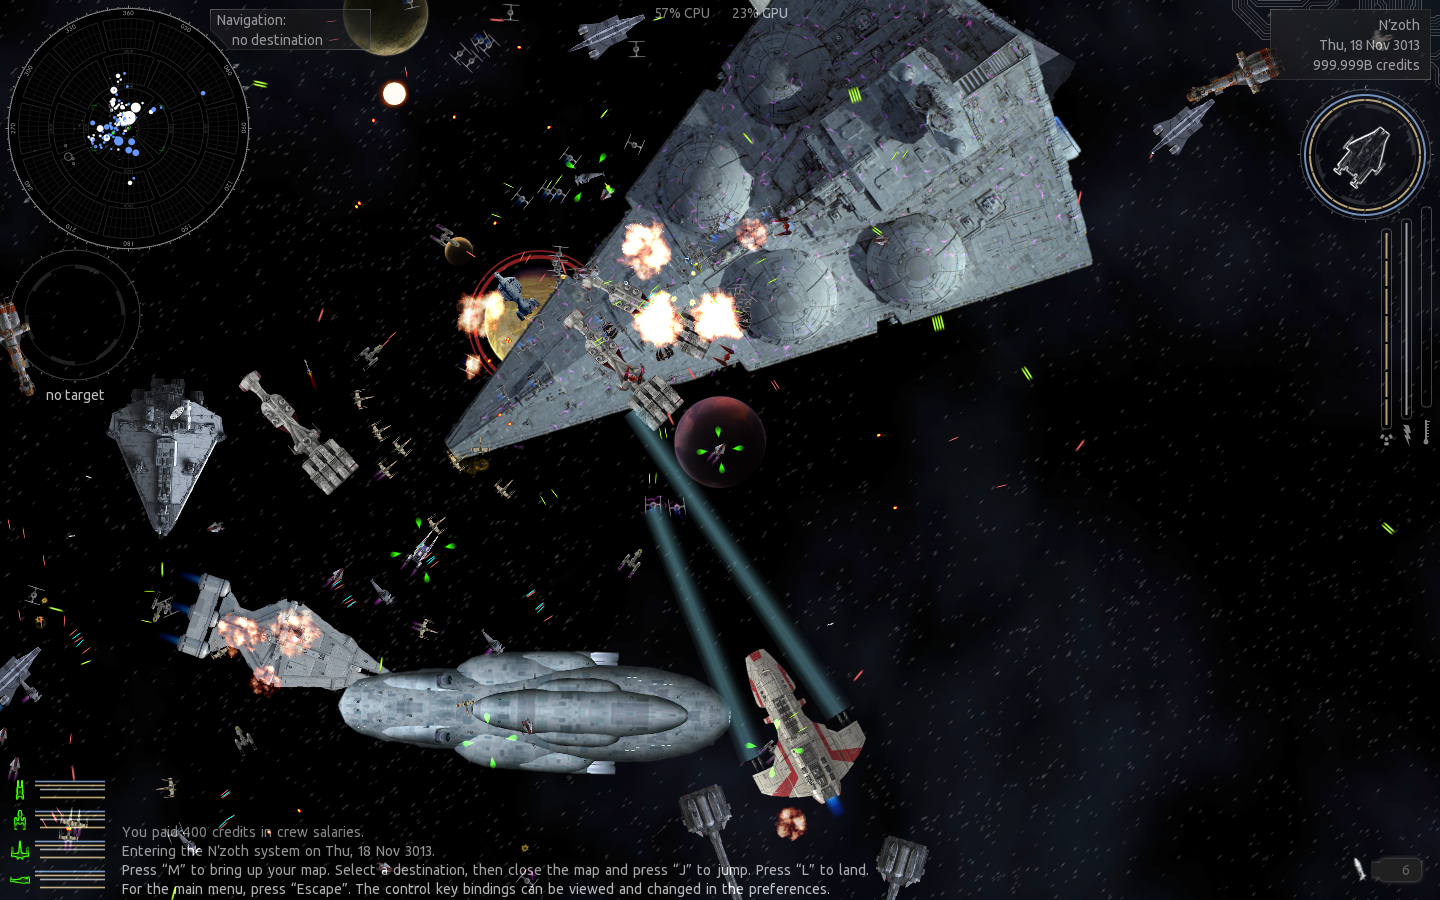 endless sky ships leaving fighters behind when recalled.